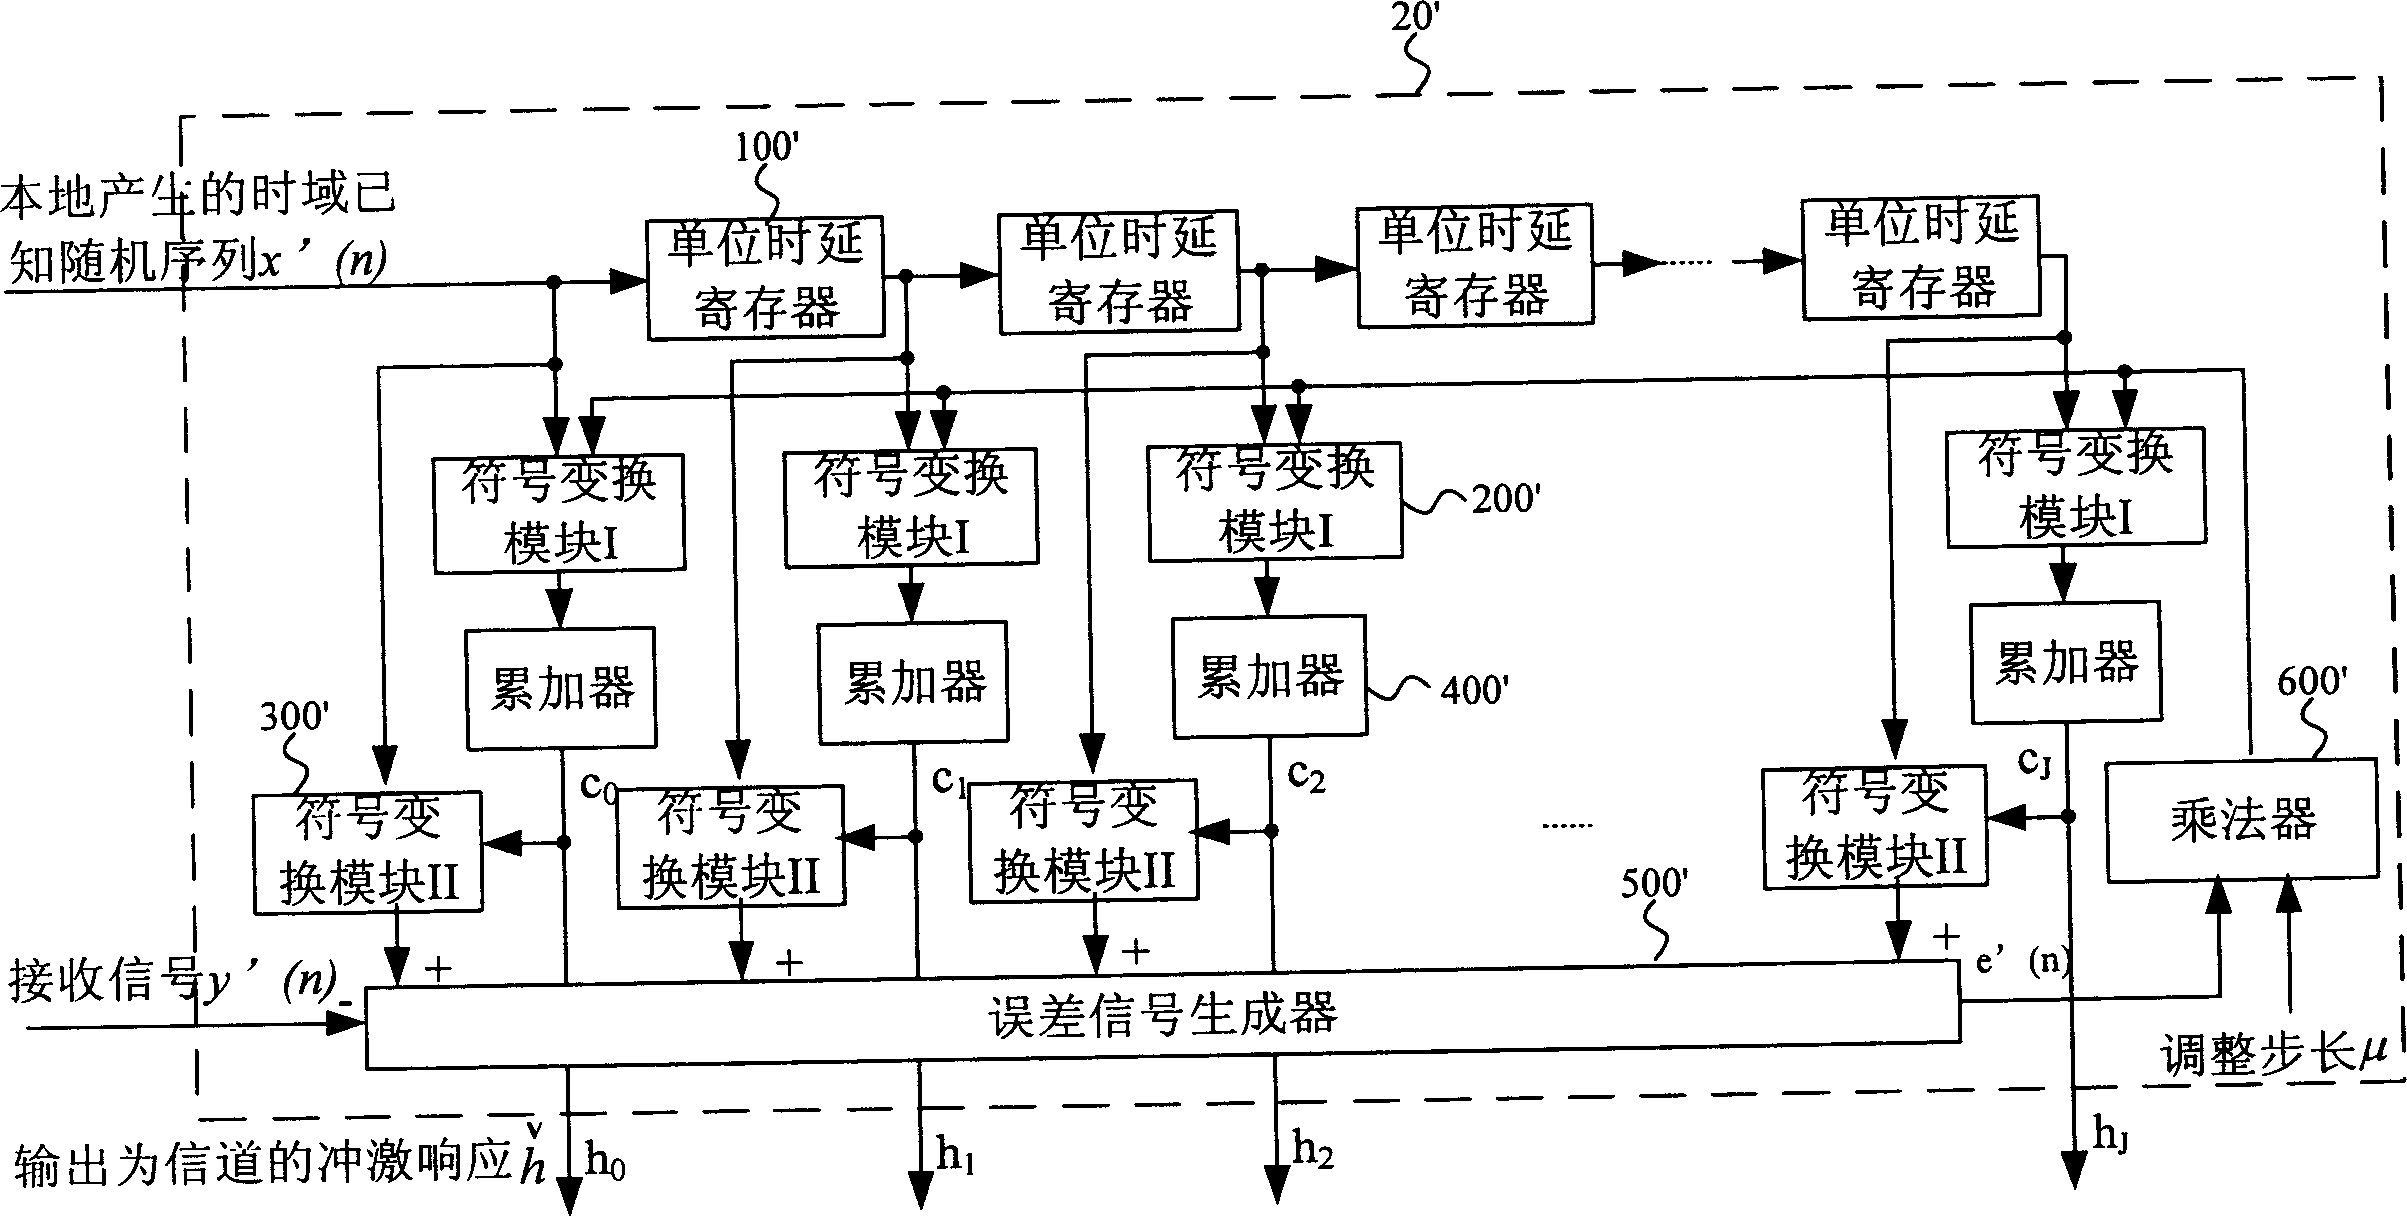 Channel estimating and balancing apparatus for time domain known array OFDM system and method thereof